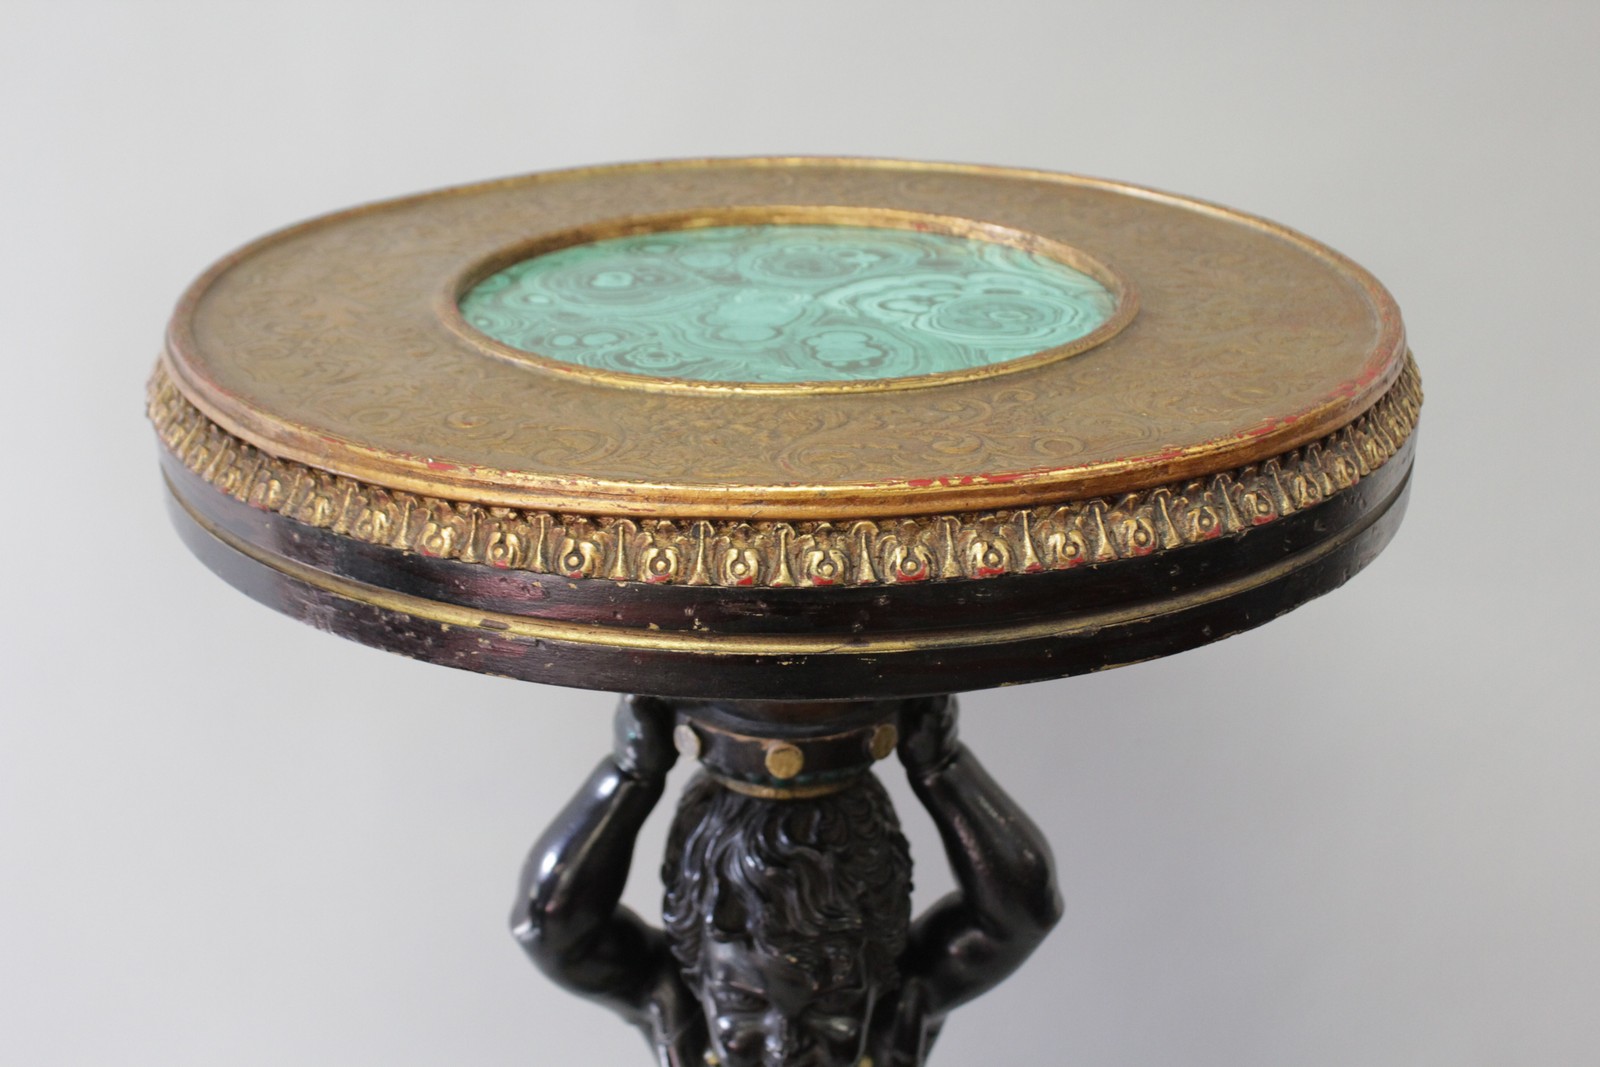 A SUPERB PAIR OF CARVED PAINTED AND GILDED BLACKAMOOR STANDS, the tops inset with a malachite panel, - Image 5 of 5